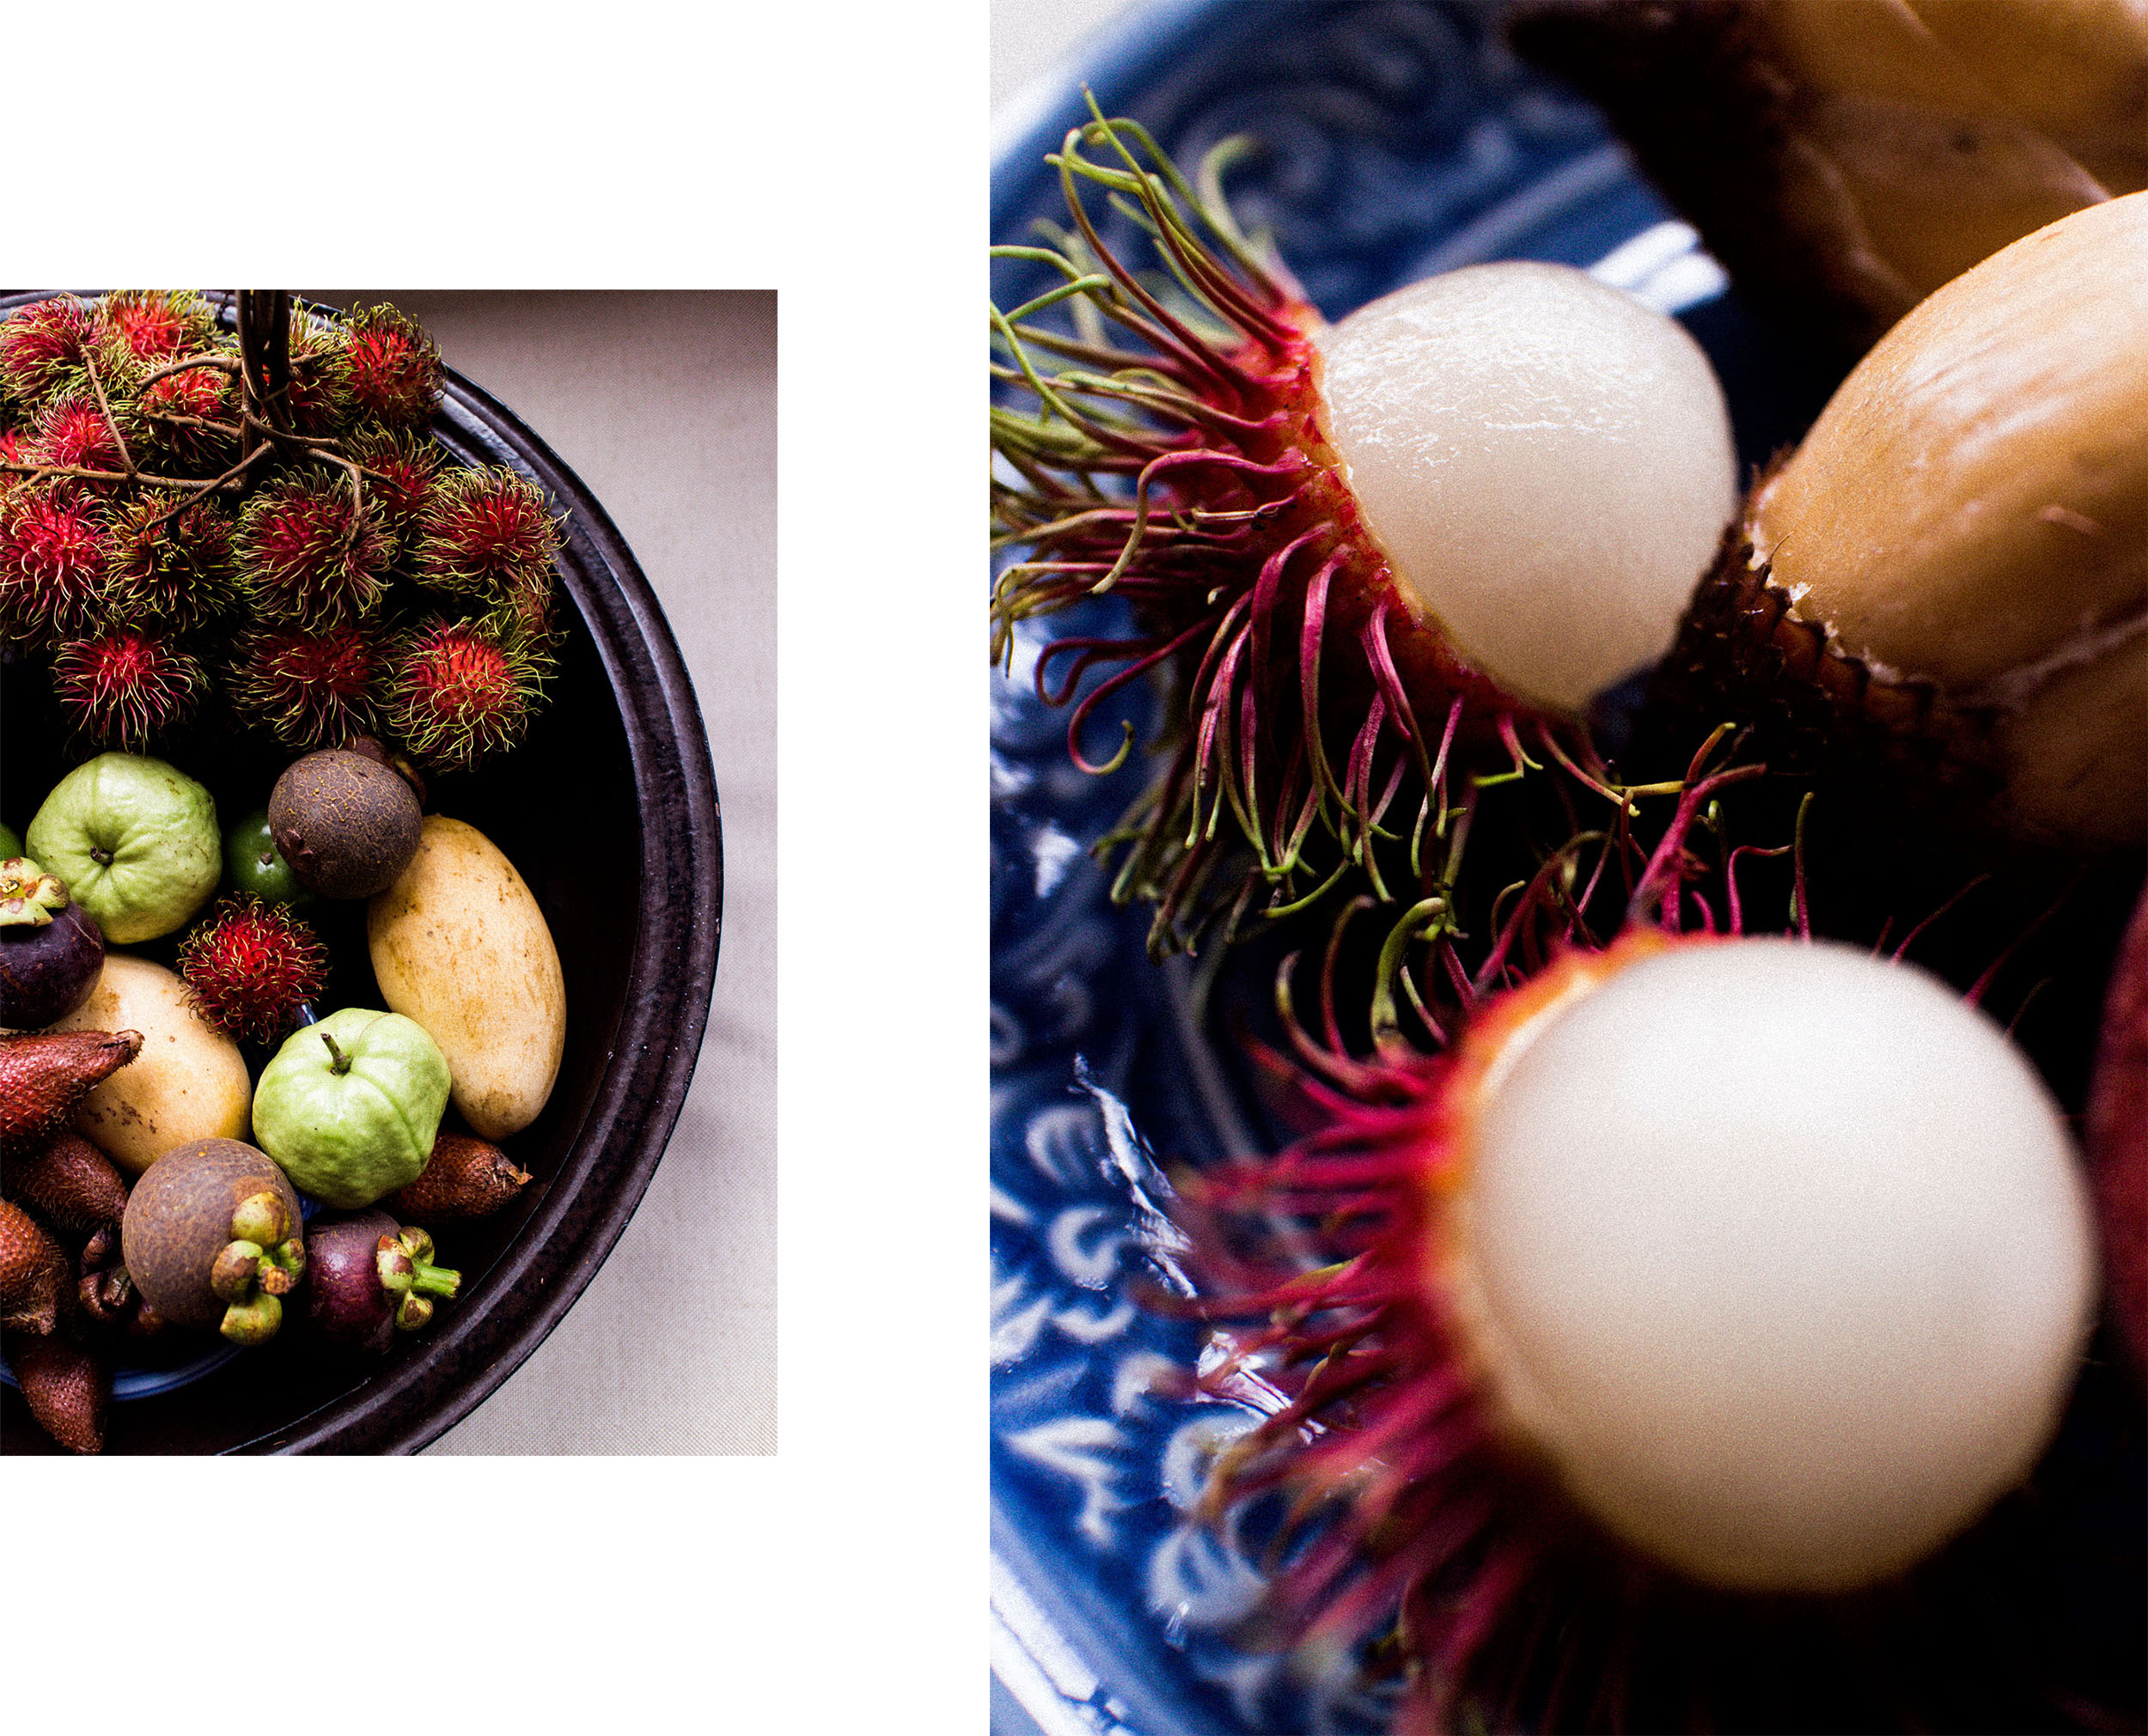 Die besten Thai Früchte / The best Thai fruits you have to try on your holiday